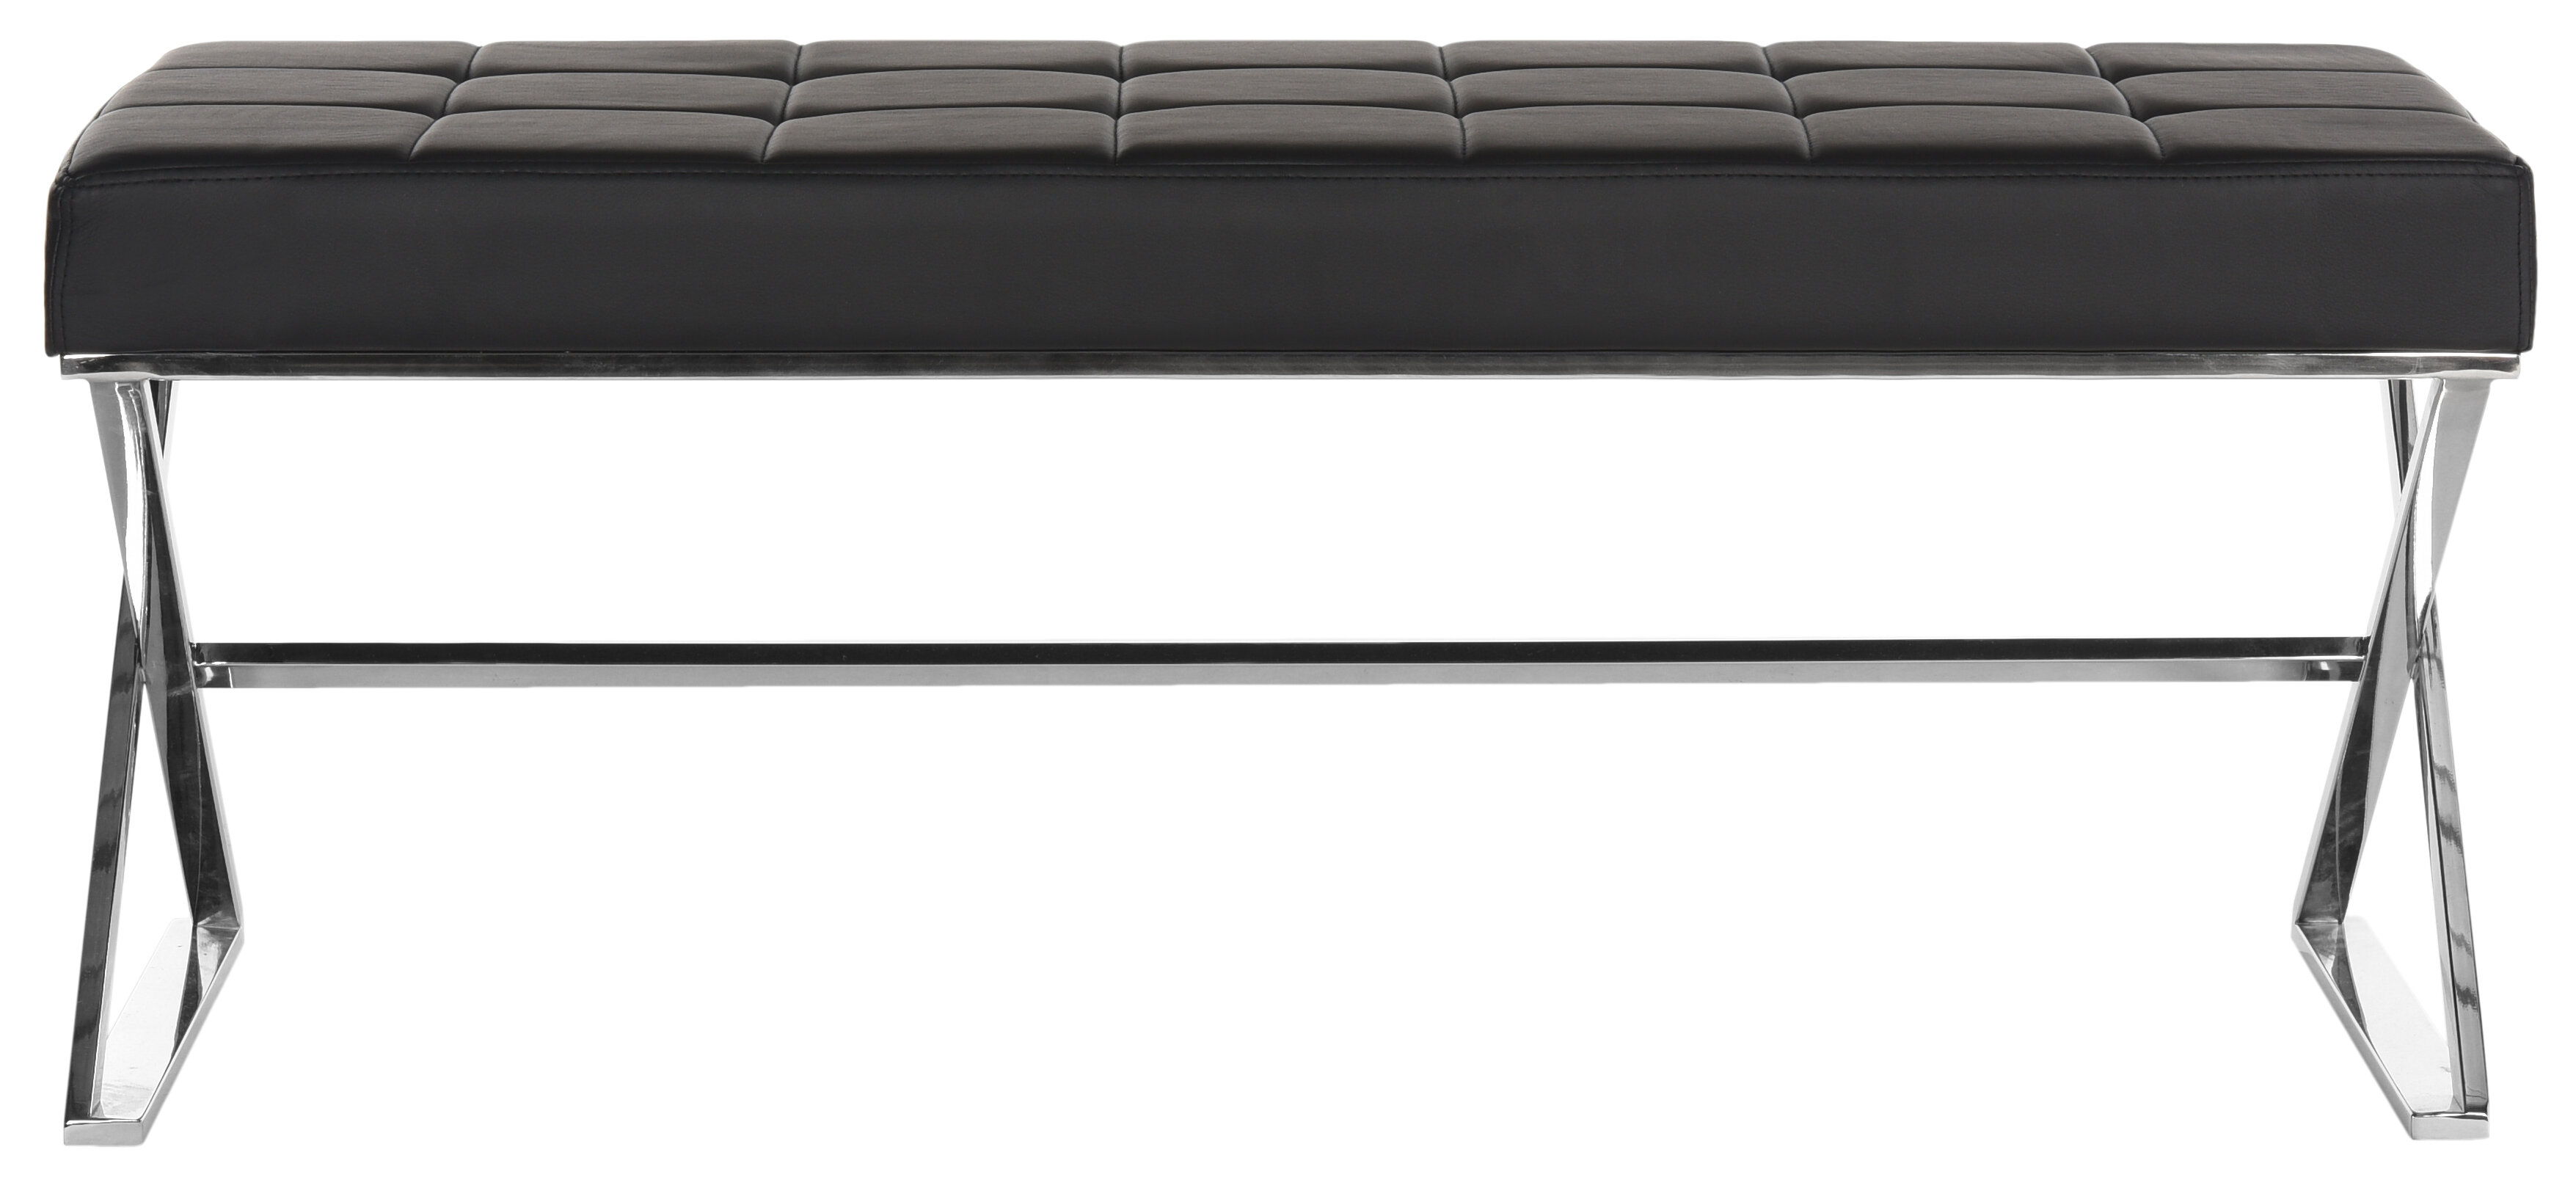 Chromium Faux Leather Bench Reviews Allmodern